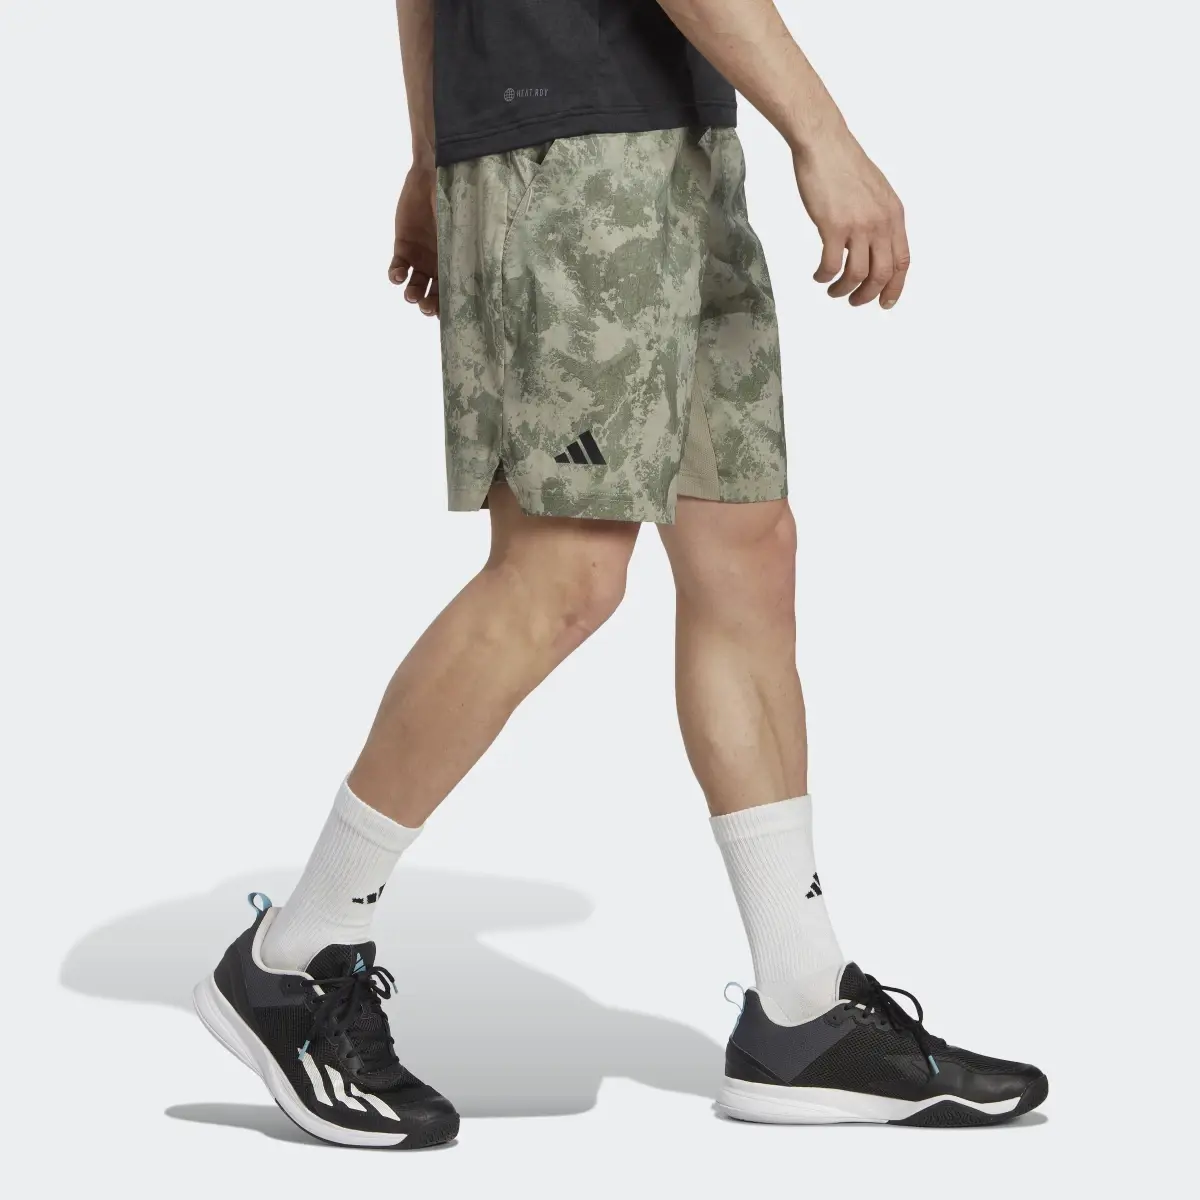 Adidas Tennis Paris HEAT.RDY Two-in-One Shorts. 3